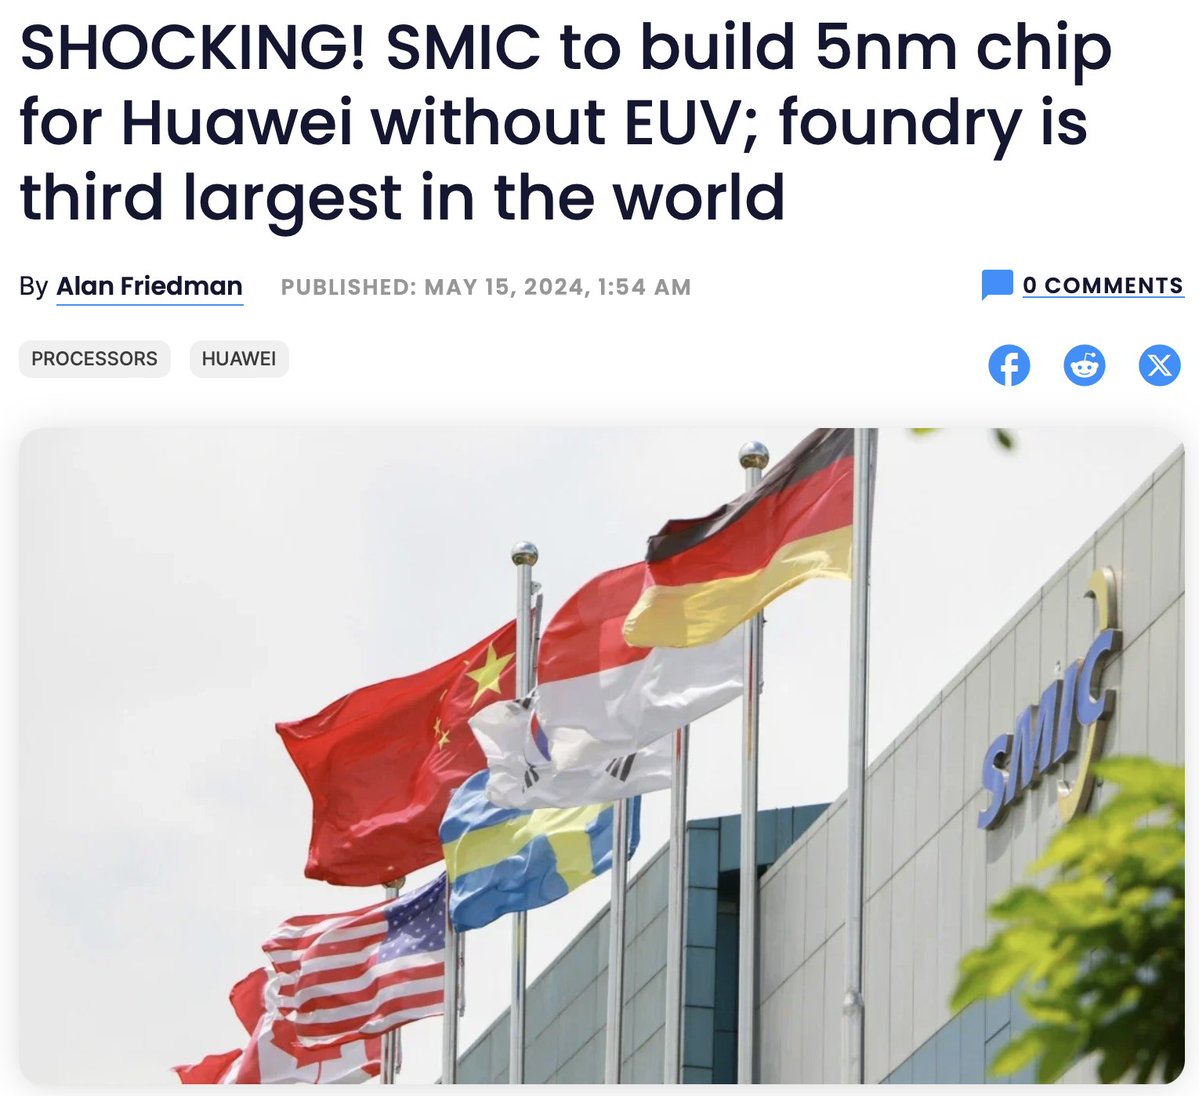 If this news is indeed correct, and I suspect it is, it's yet more evidence of failed US policies. Remember the US thought their policies were stopping China's semiconductor industry from advancing further than 14nm, and now China are reportedly at 5nm. It's rumoured to appear in